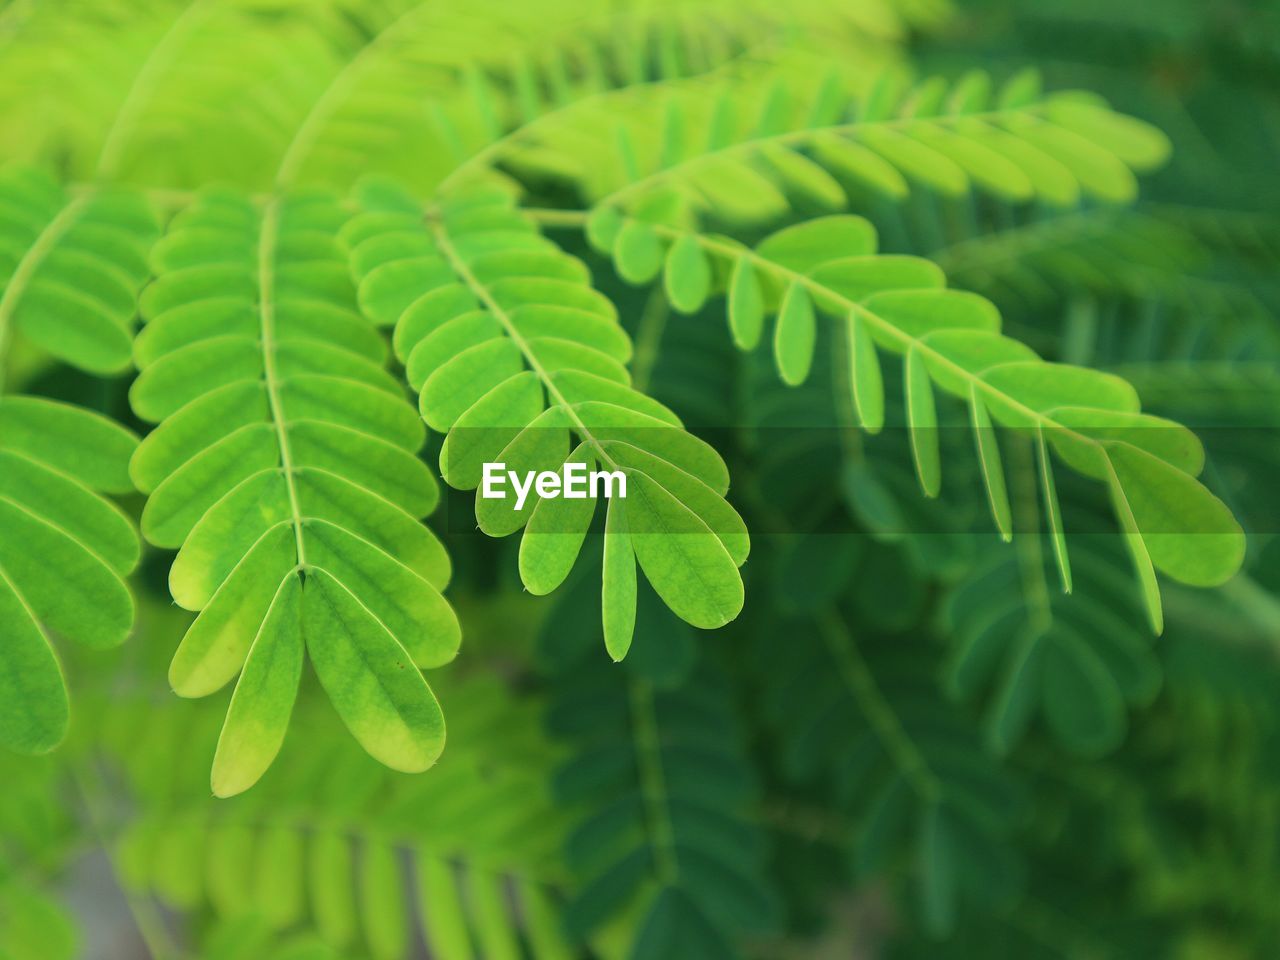 leaf, plant part, green, plant, tree, nature, beauty in nature, ferns and horsetails, growth, close-up, no people, branch, fern, freshness, outdoors, environment, flower, backgrounds, land, day, botany, food and drink, selective focus, forest, plant stem, focus on foreground, lush foliage, foliage, food, vegetation, environmental conservation